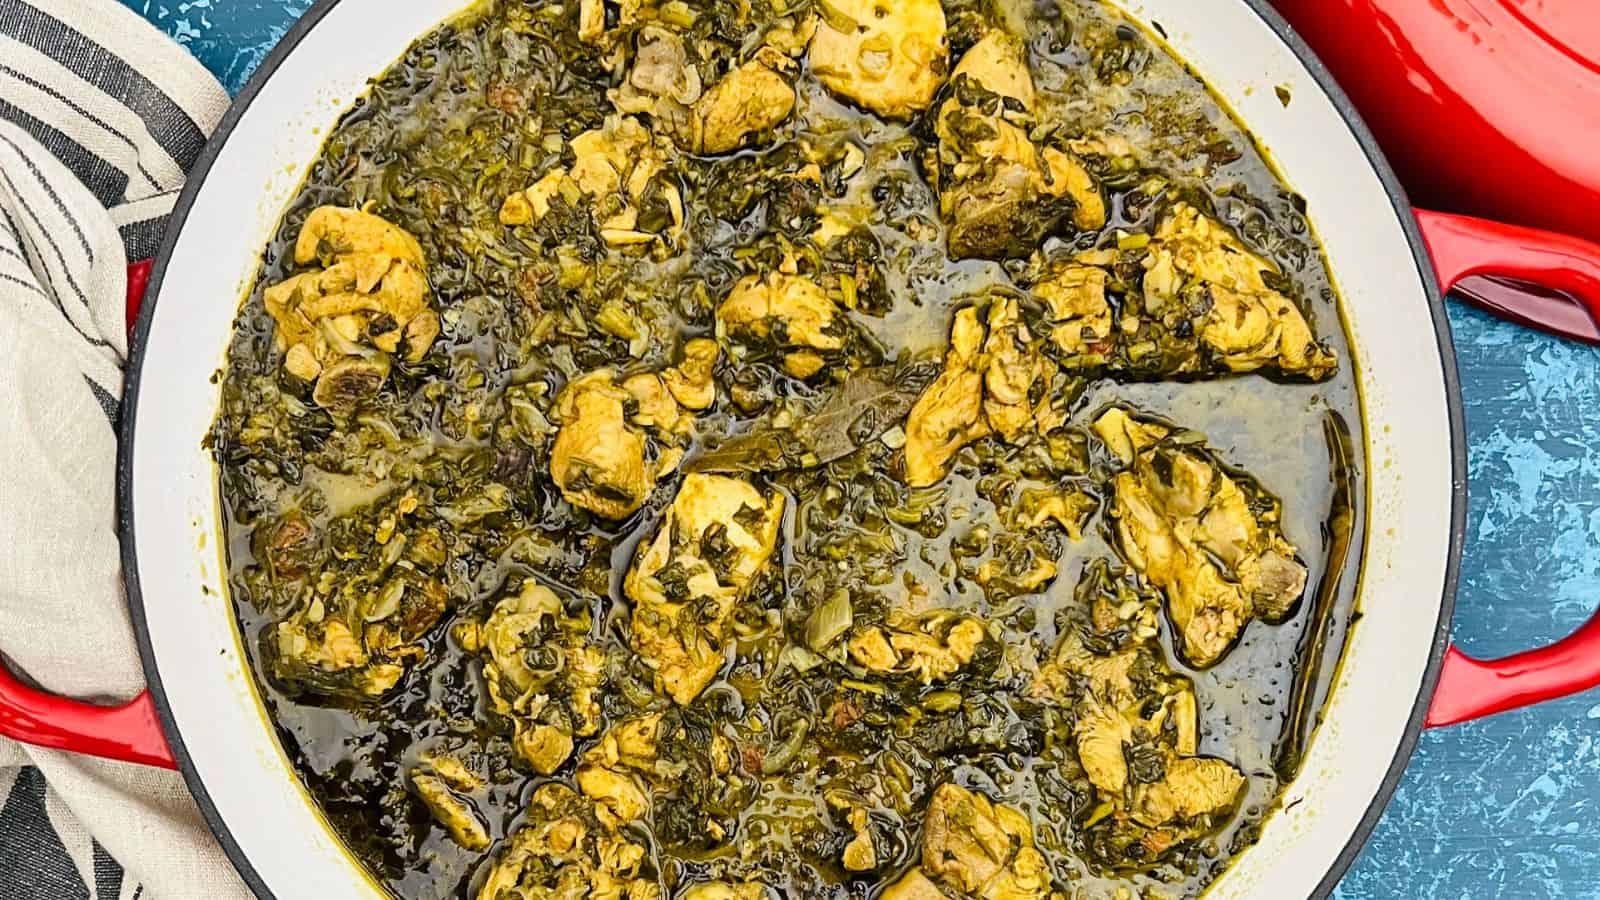 <p>Don't sleep on this methi chicken situation! Vibrant fenugreek leaves add fresh aromas and herbal notes that infuse juicy chicken with serious curry flavor - and the Instant Pot makes it stupid easy.<br><strong>Get the Recipe: </strong><a href="https://easyindiancookbook.com/methi-chicken-instant-pot/?utm_source=msn&utm_medium=page&utm_campaign=msn">Instant Pot Methi Chicken </a></p>